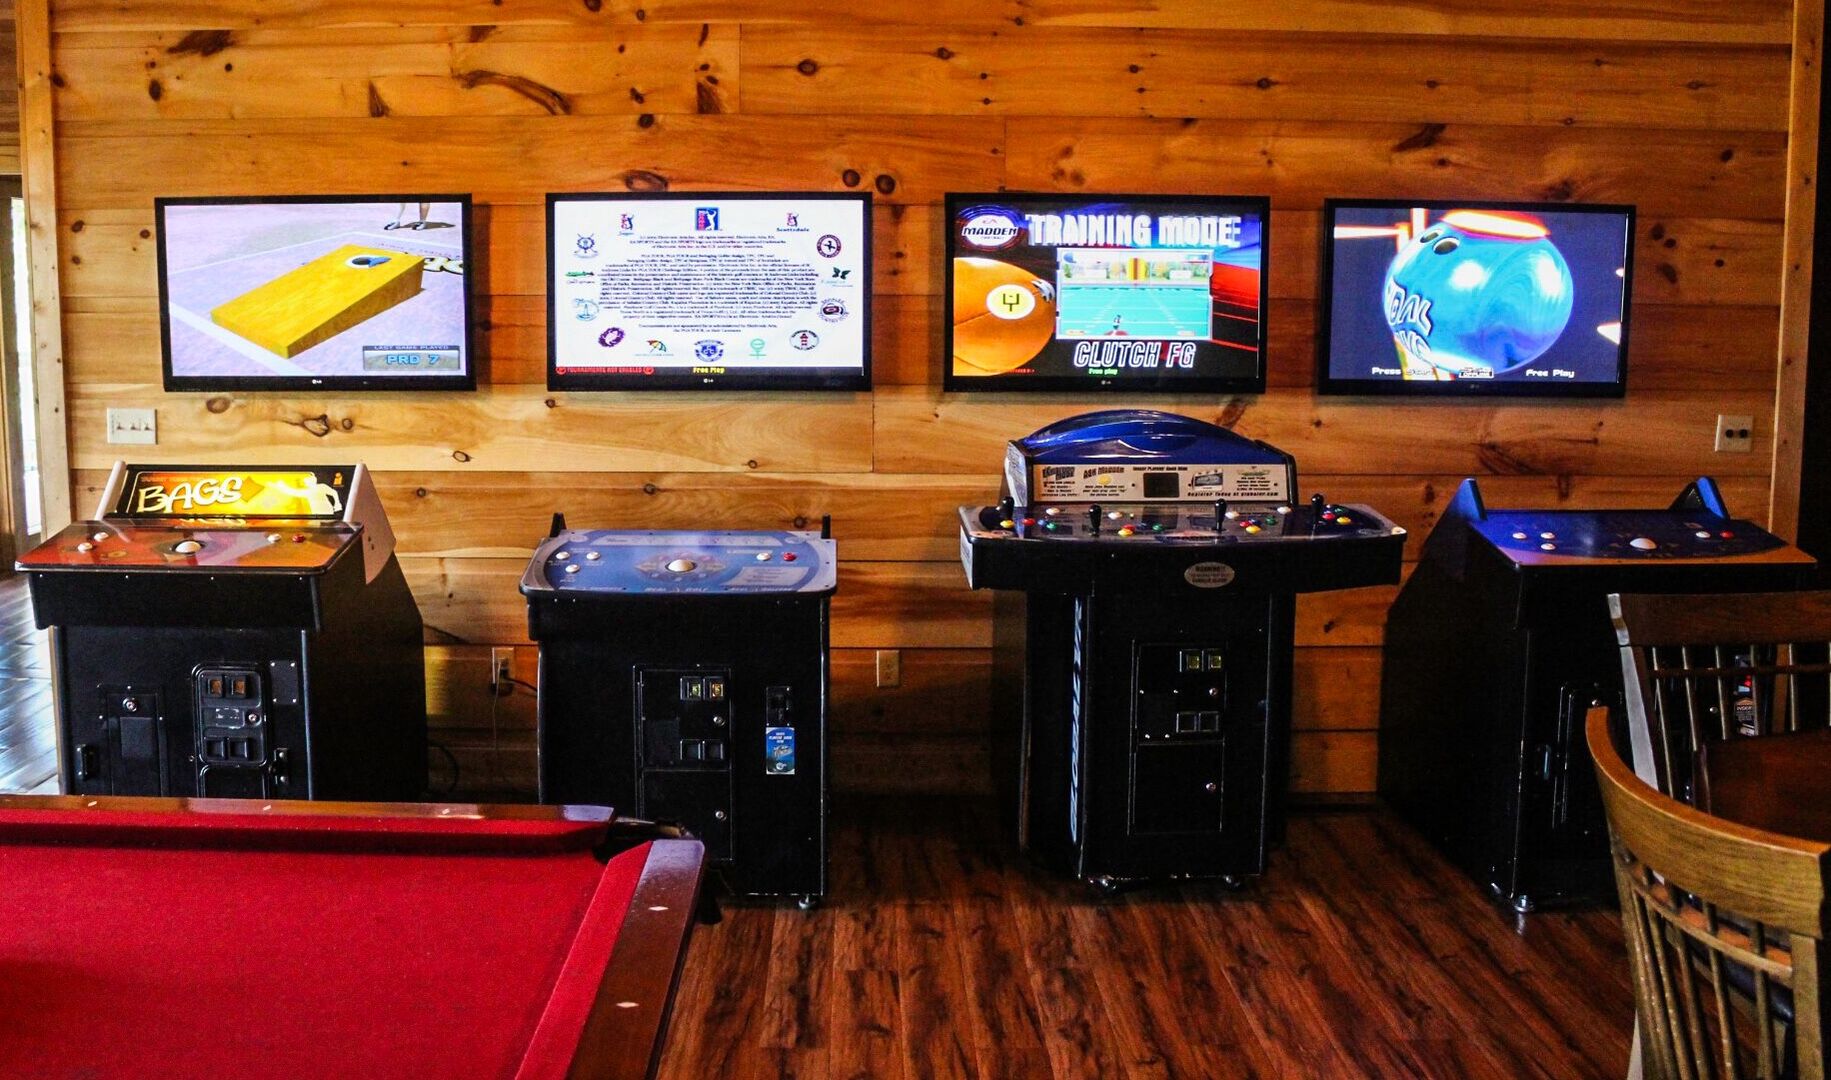 Image of Arcade Games in the Game Room.